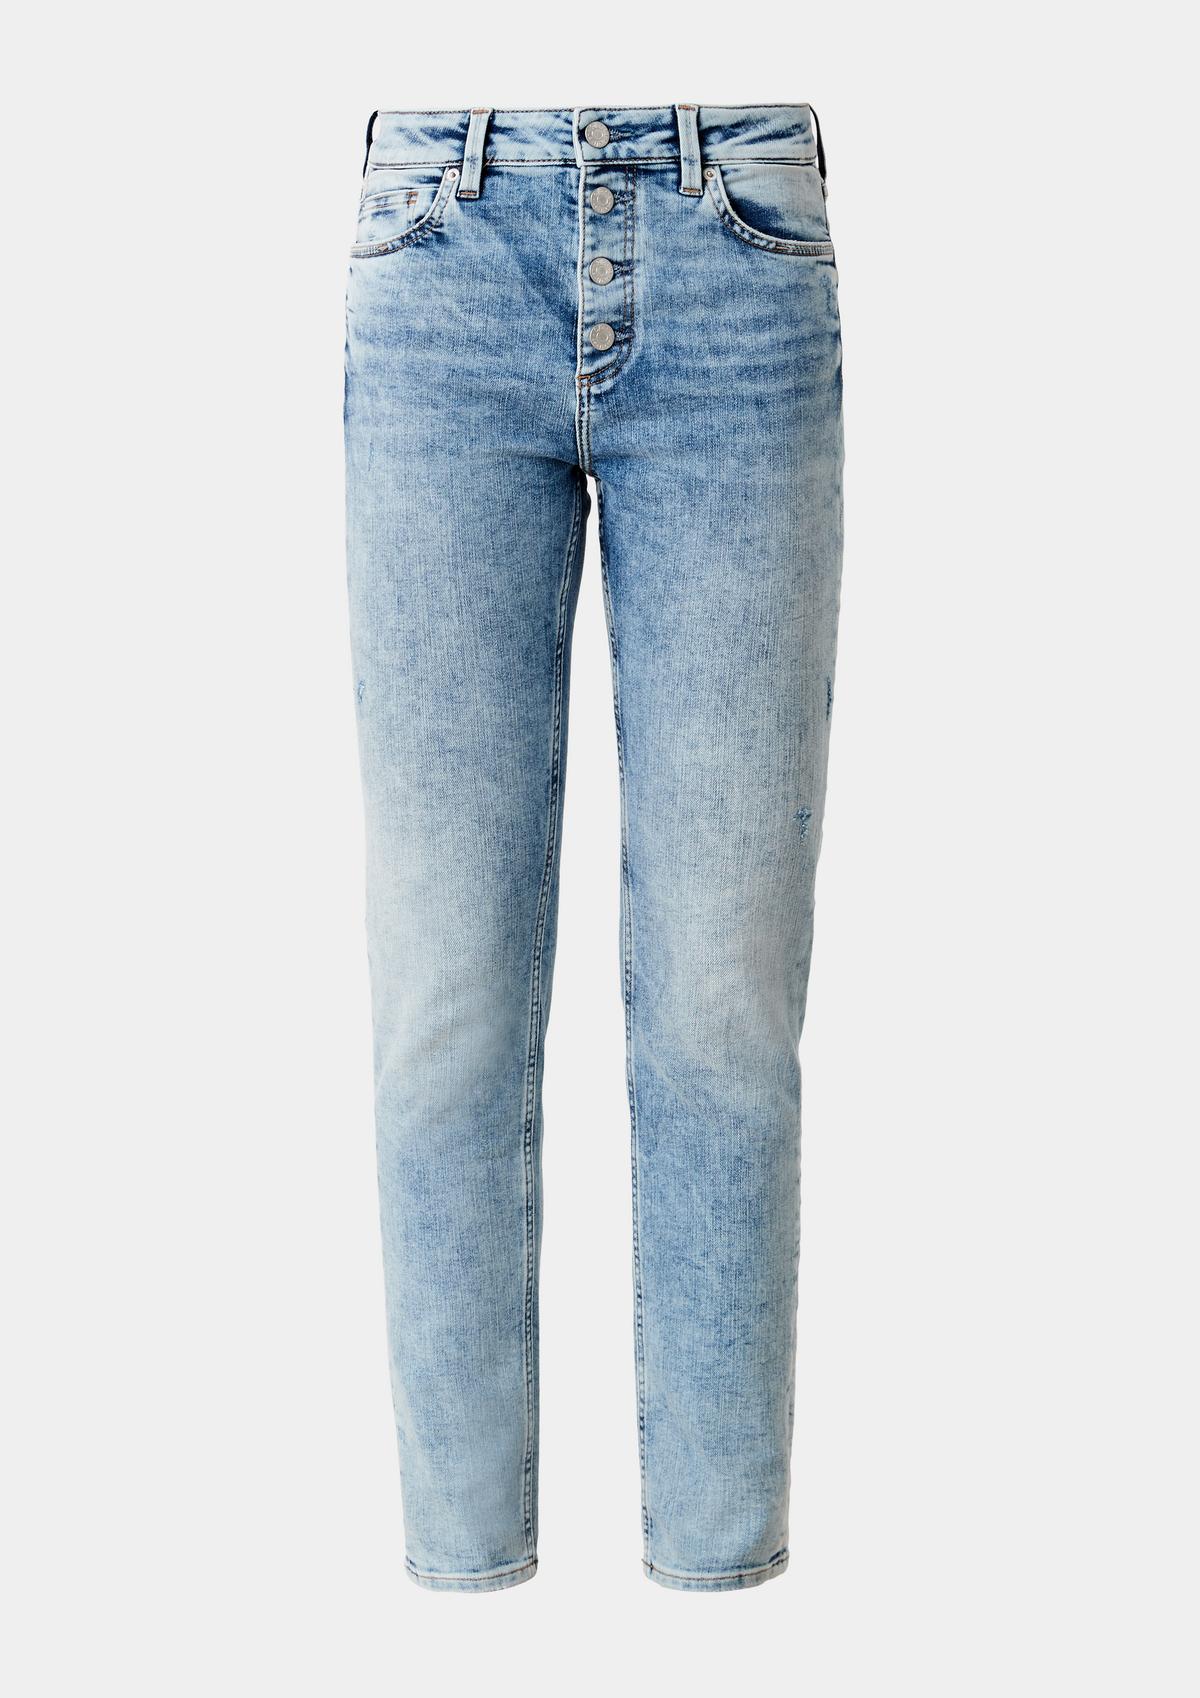 s.Oliver Skinny: jeans in a trendy wash